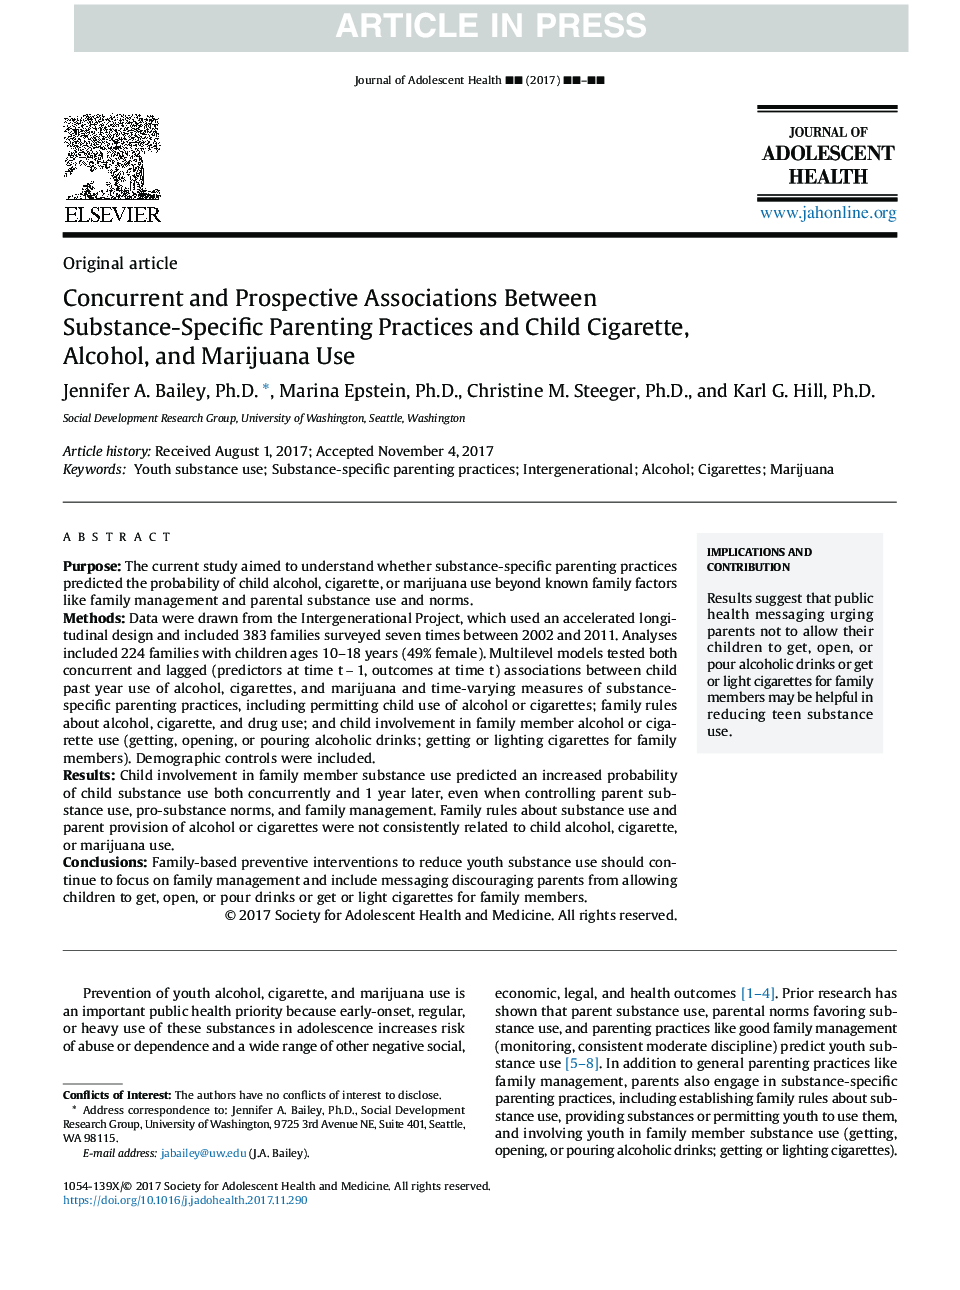 Concurrent and Prospective Associations Between Substance-Specific Parenting Practices and Child Cigarette, Alcohol, and Marijuana Use